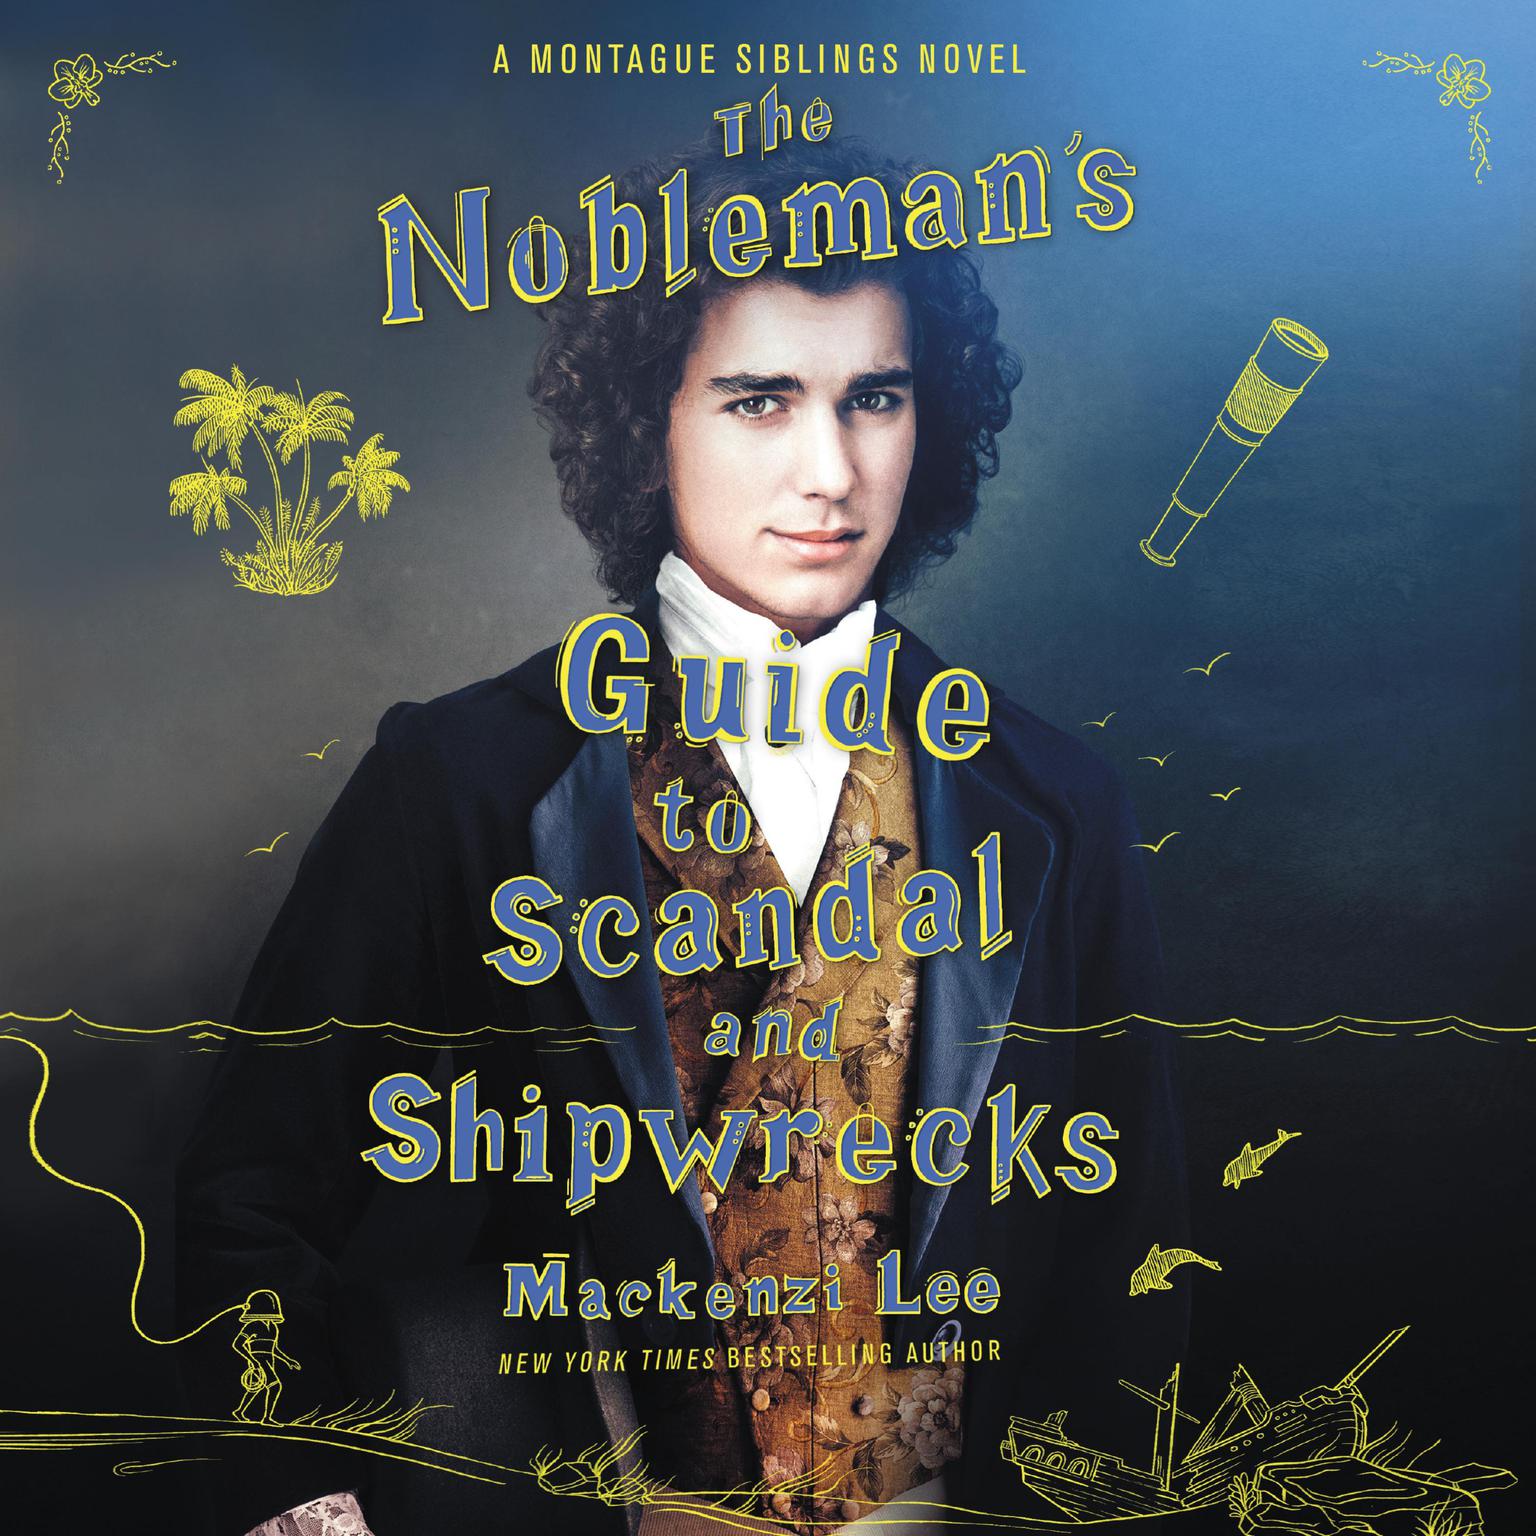 Nobleman's Guide to Scandal and Shipwrecks (2020, HarperCollins Publishers)